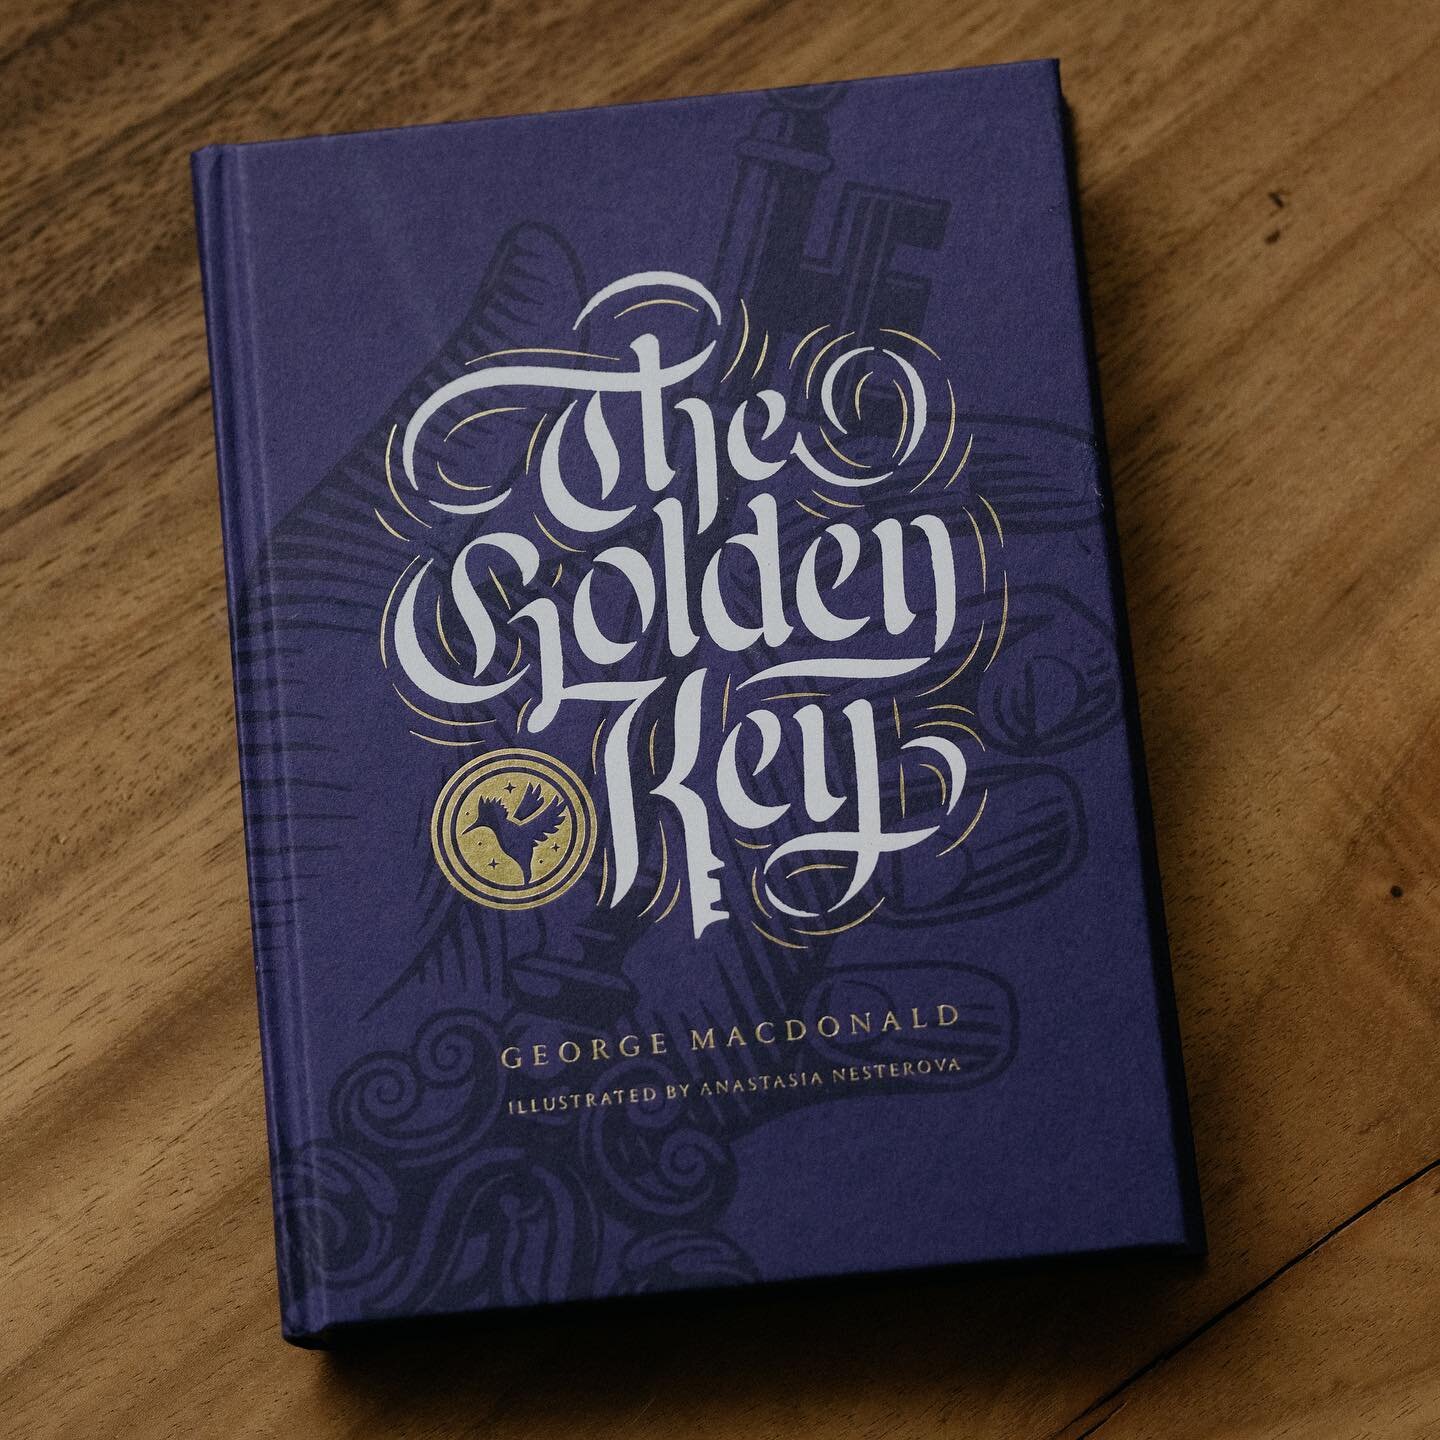 The Golden Key and other Fairy Tales | George MacDonald might not be as well known as the giants he influenced, like C.S. Lewis, Tolkien, and Madeleine L&rsquo;Engle, but this book introduces readers to the &ldquo;Forgotten Father of Fantasy Fiction.